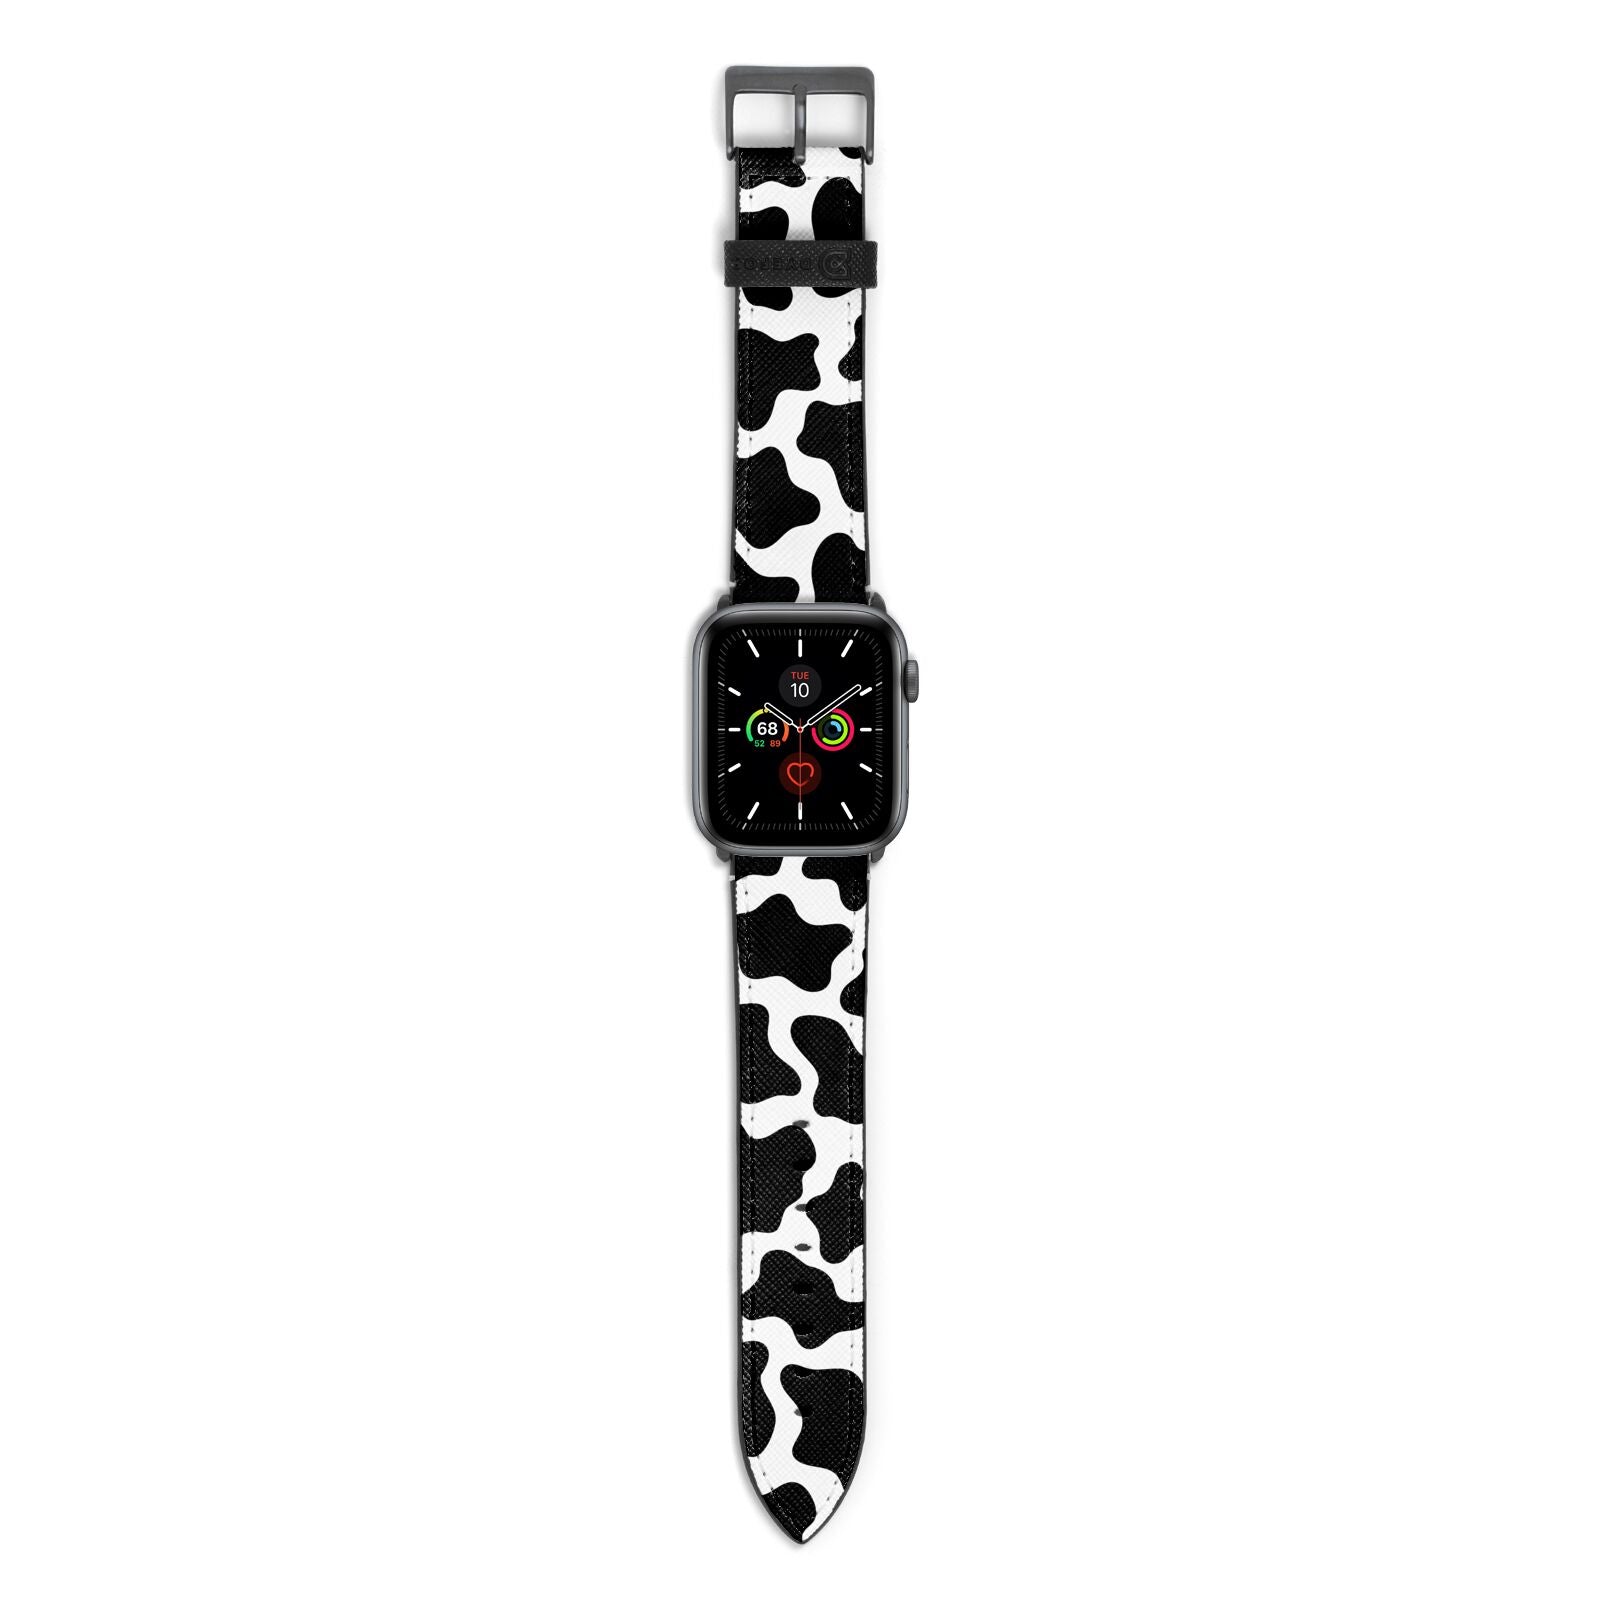 Cow Print Apple Watch Strap with Space Grey Hardware